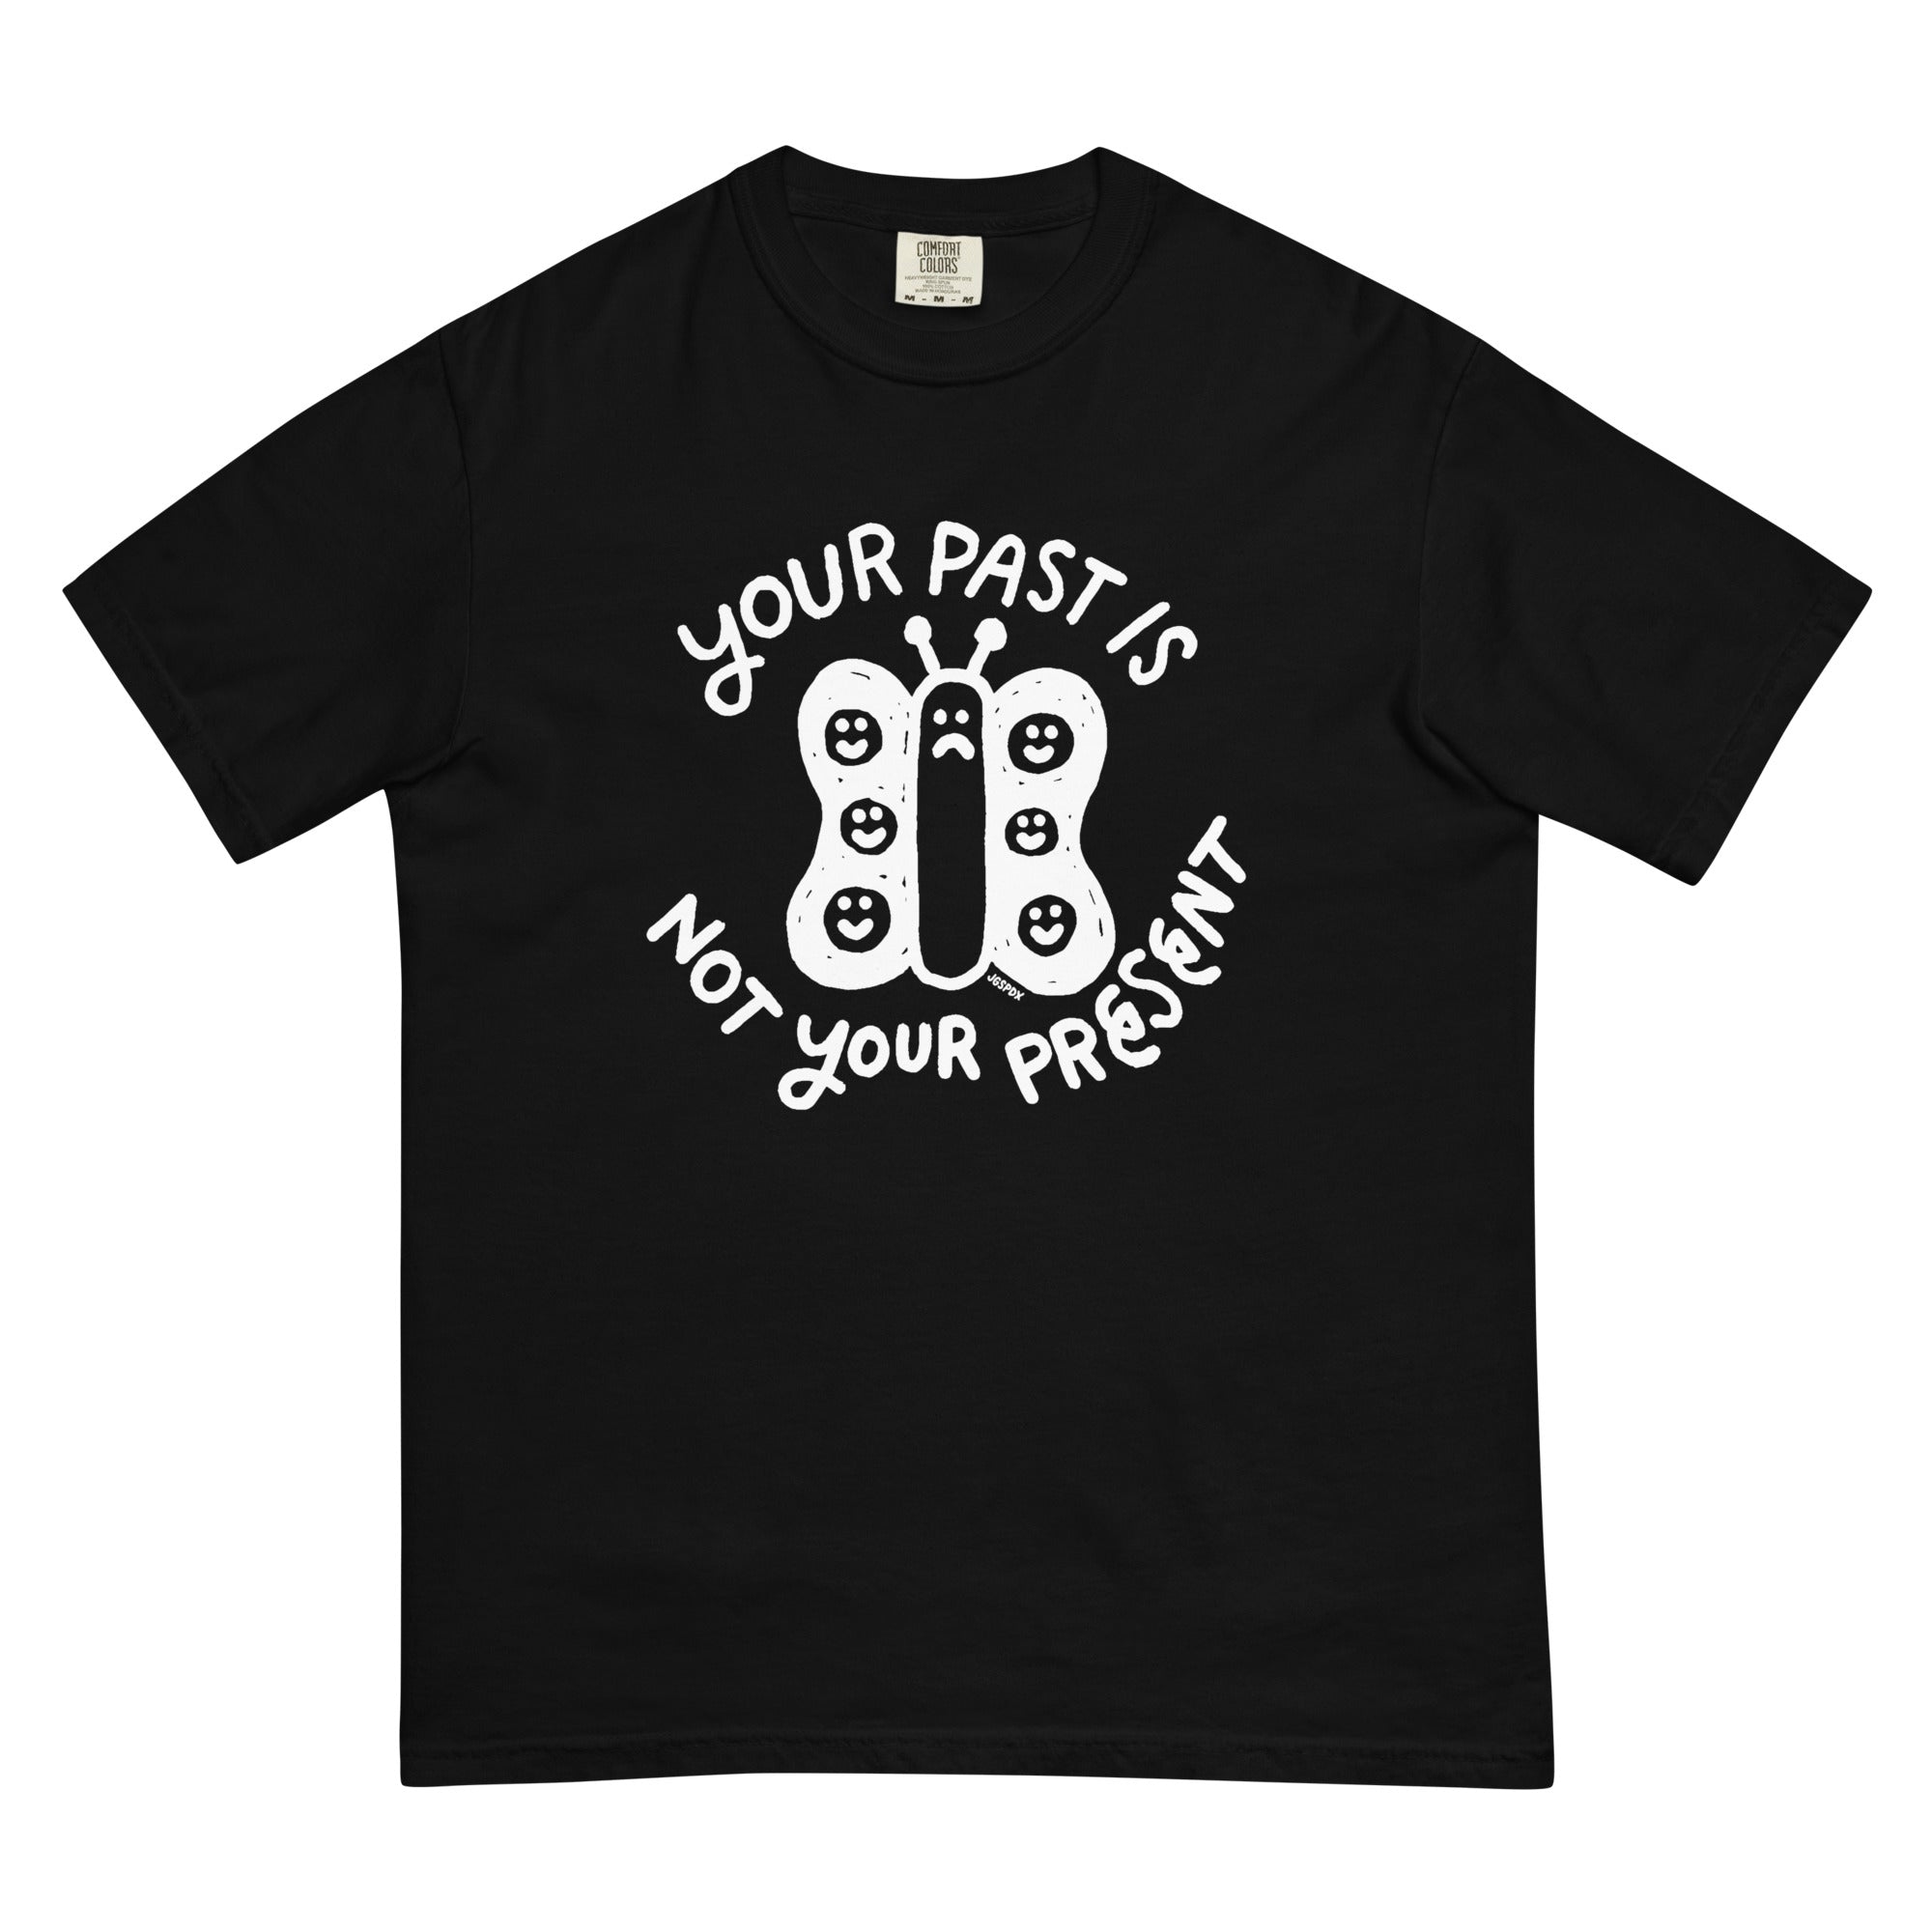 Your Past Is Not Your Present t-shirt (black)